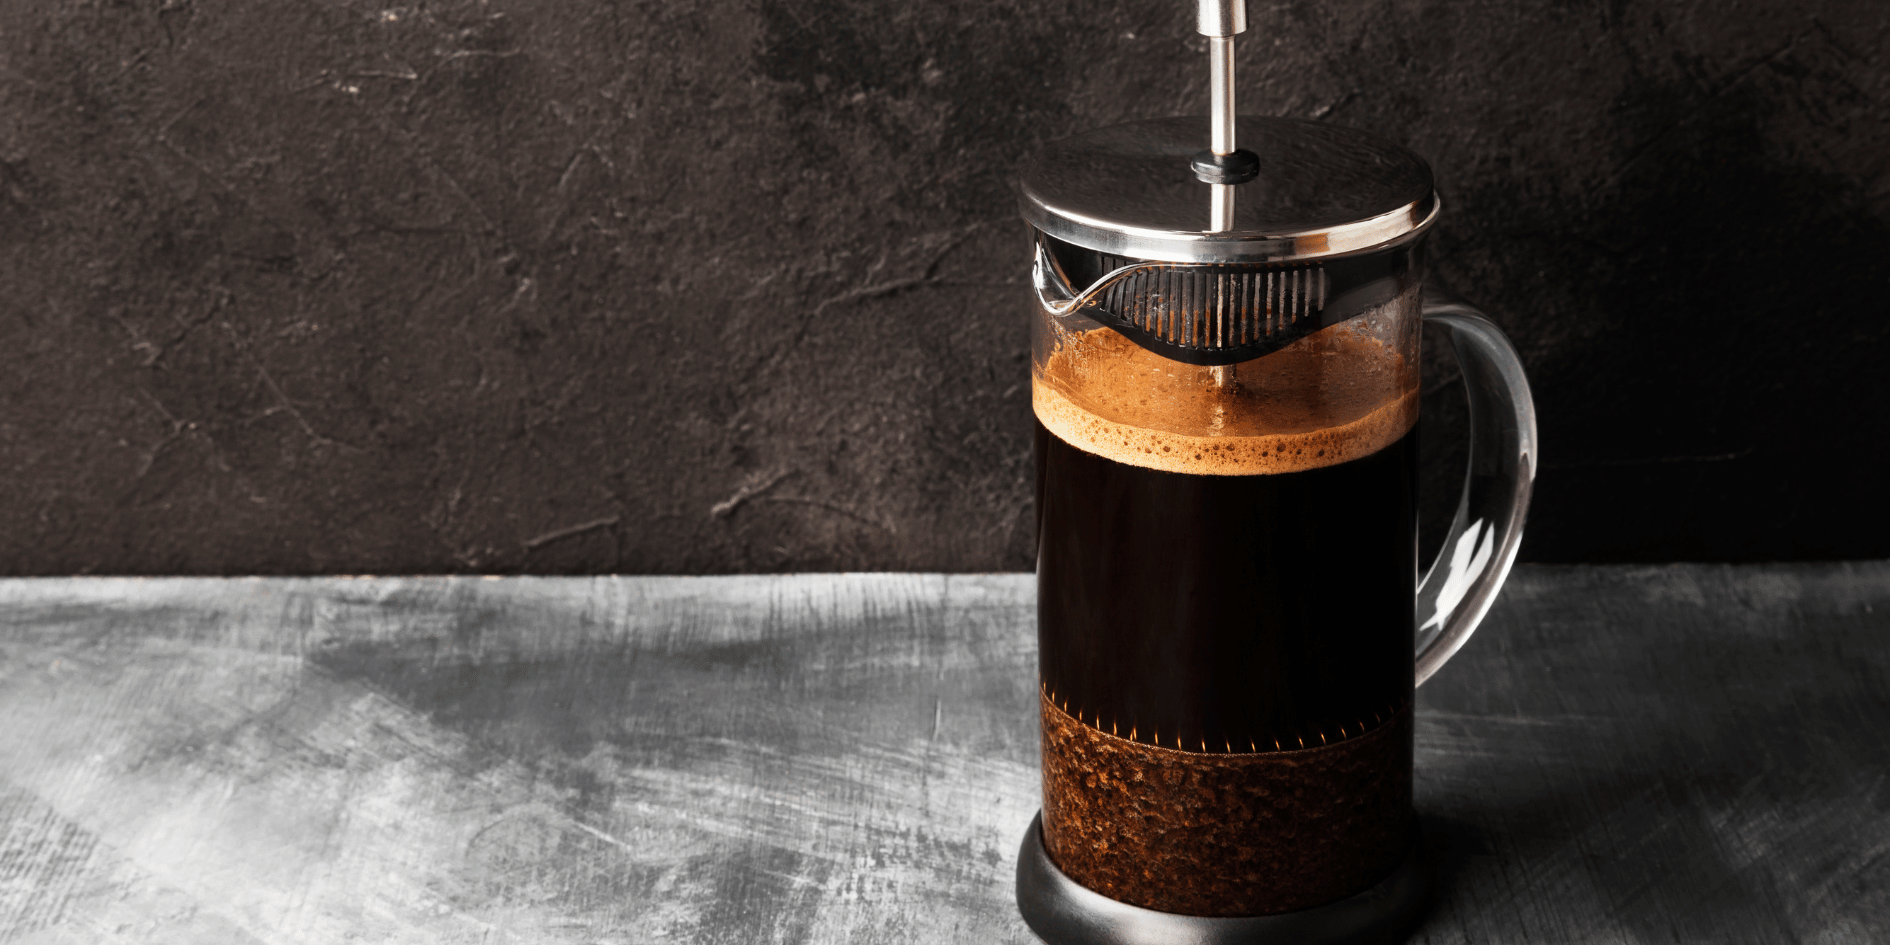 Peak Flavor for French Press Coffee